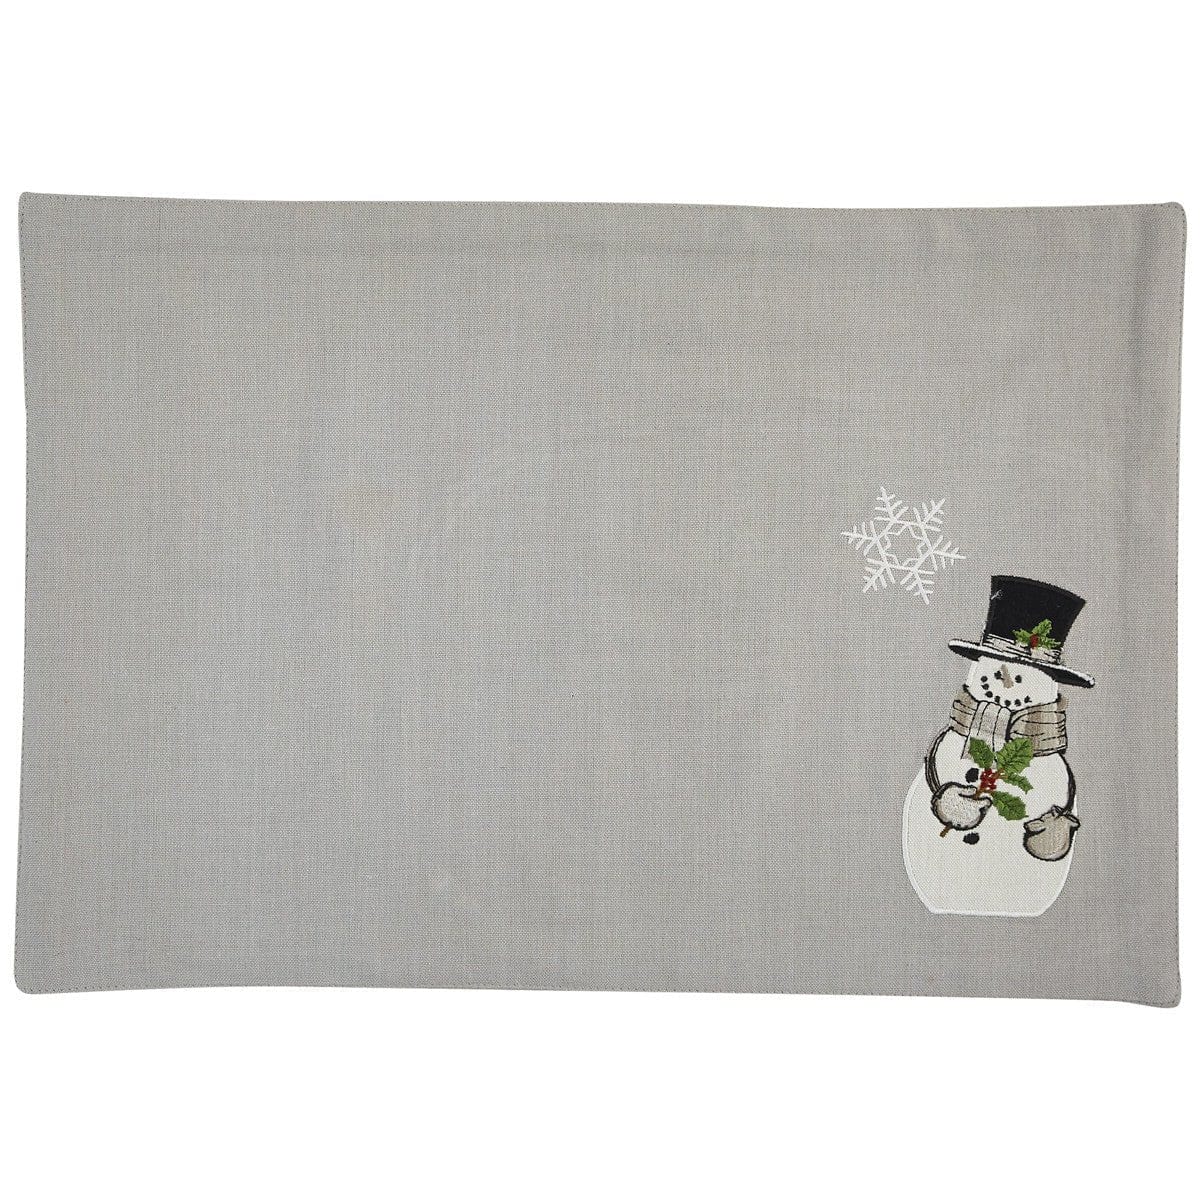 Snowman & Holly Appliqued & Embroidered Placemat-Park Designs-The Village Merchant